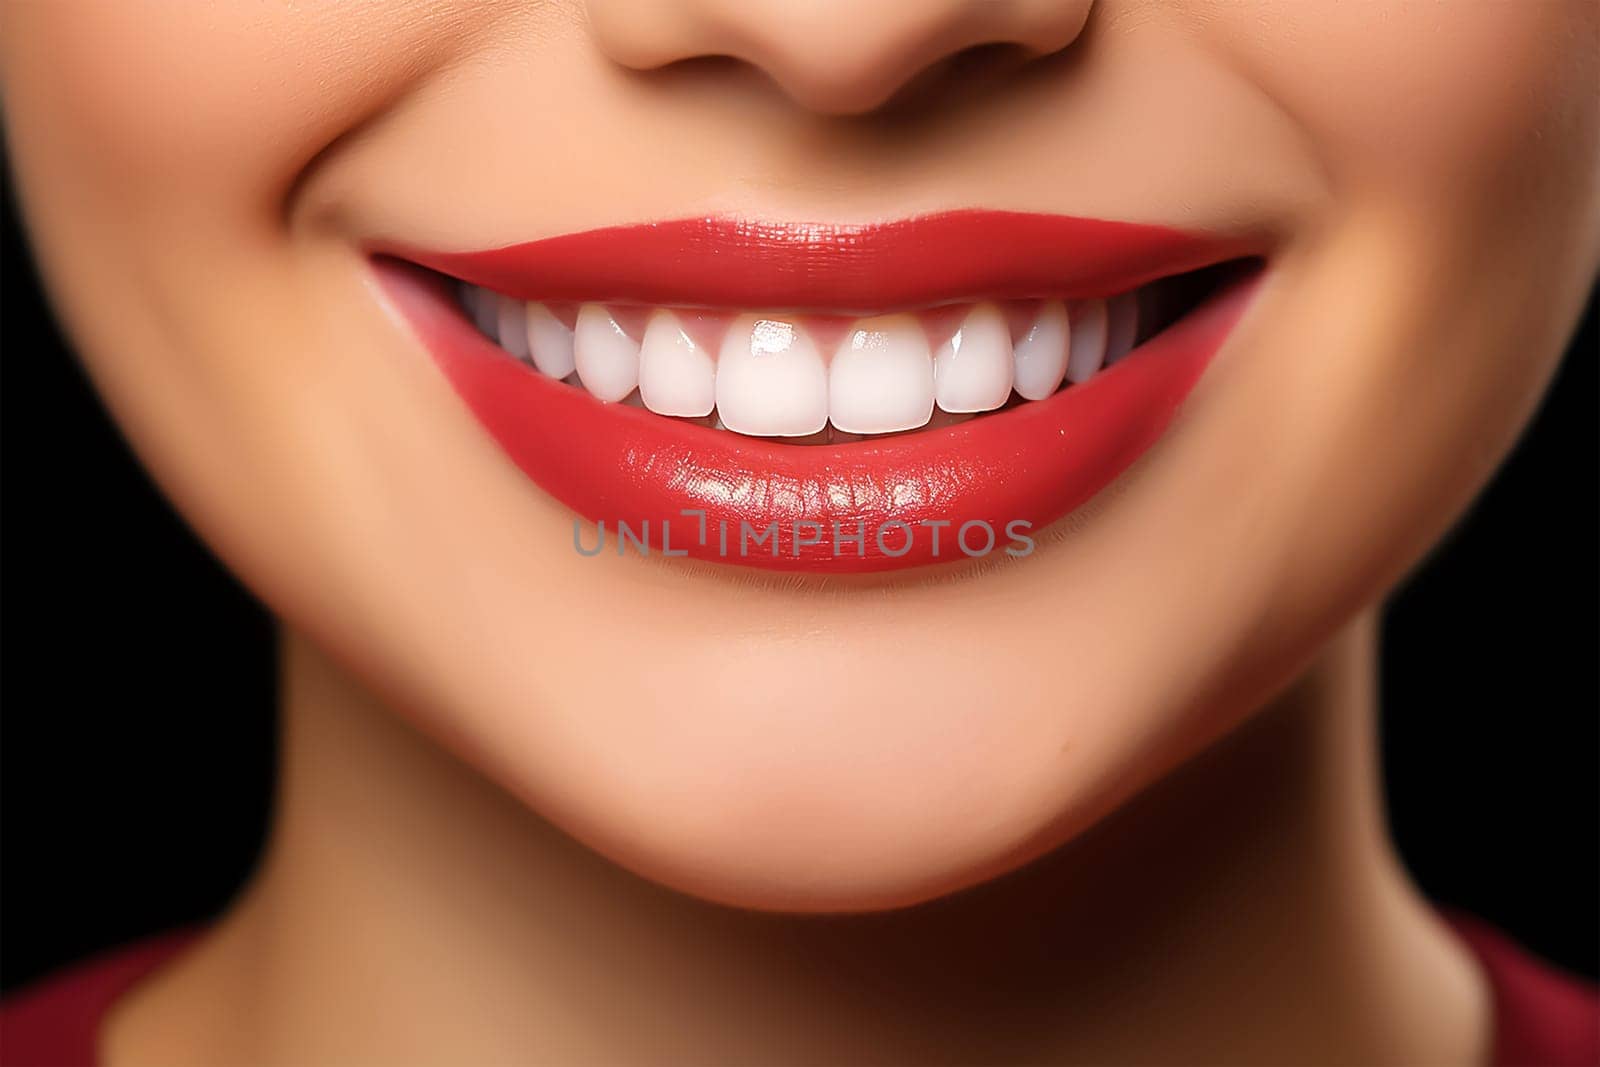 perfect smile with healthy white teeth. red lipstick on lips. by Suietska